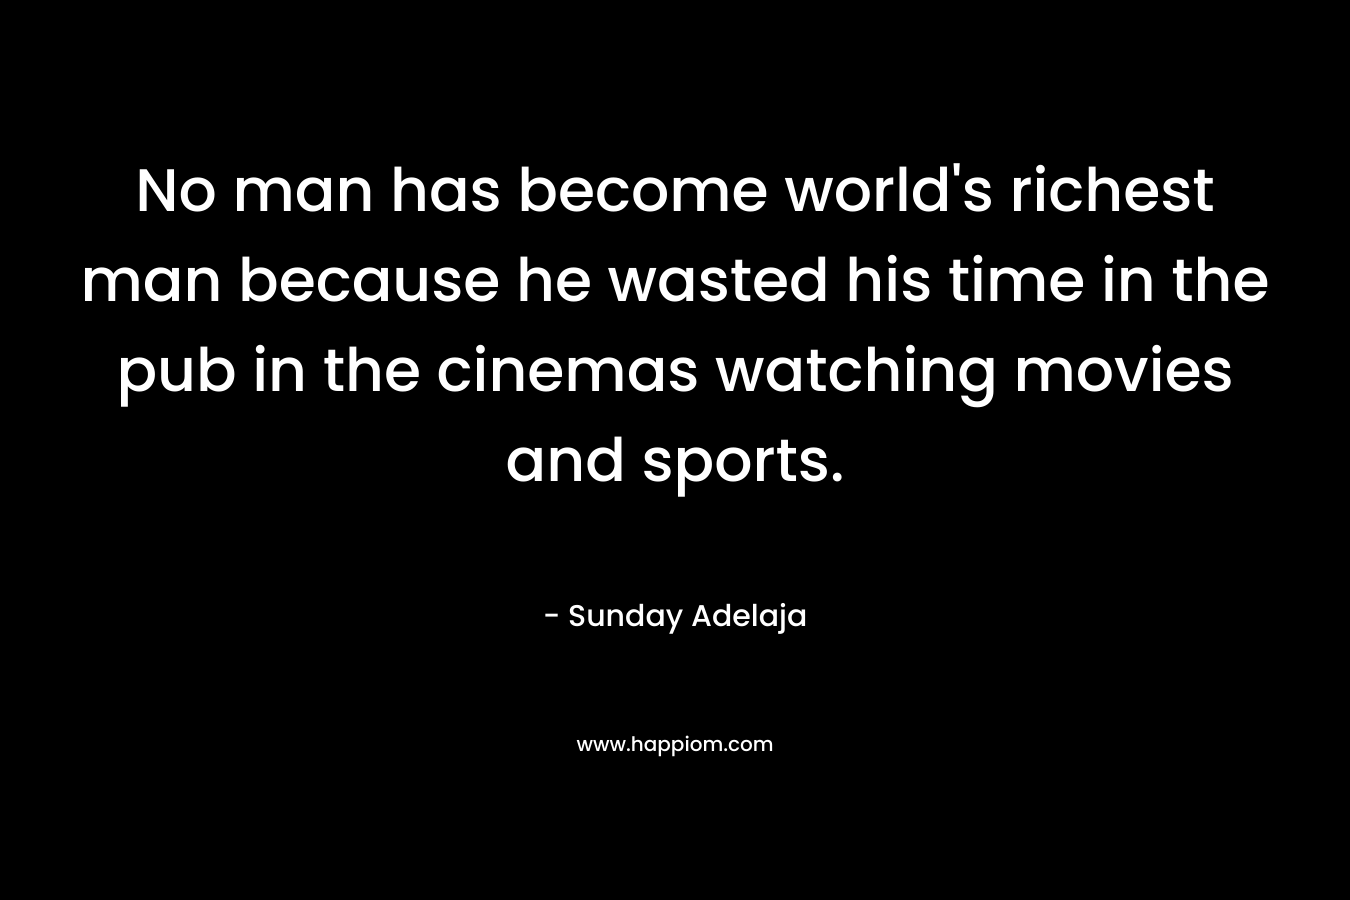 No man has become world's richest man because he wasted his time in the pub in the cinemas watching movies and sports.